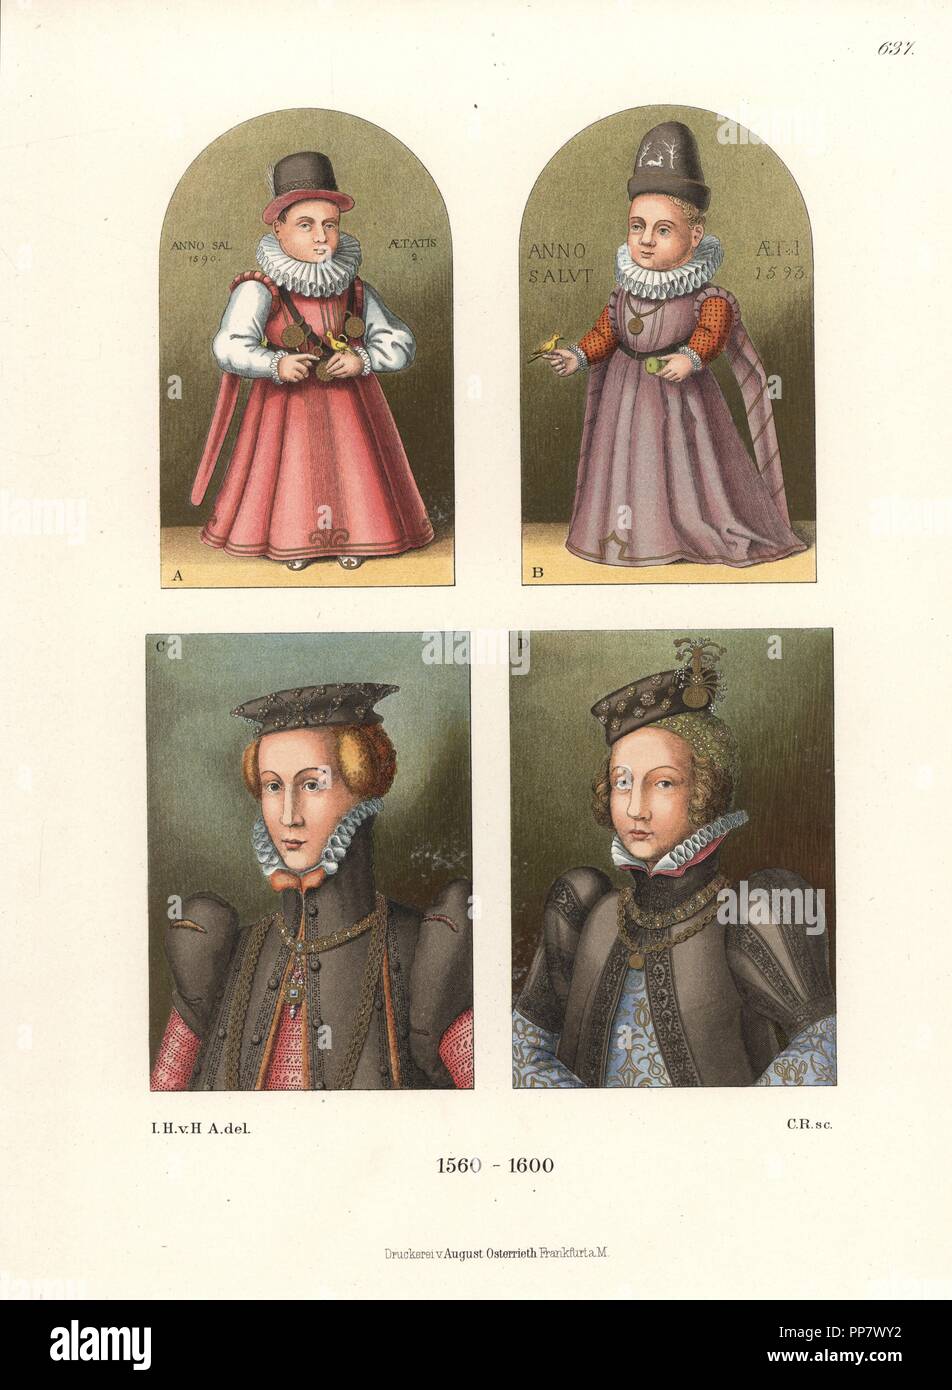 Oil paintings of children and women, late 16th century. Two-year old child A, one-year old child B, noble woman C, and Sabine of Wurttemberg, Landgravine of Hesse D. Chromolithograph from Hefner-Alteneck's Costumes, Artworks and Appliances from the Middle Ages to the 17th Century, Frankfurt, 1889. Illustration by Dr. Jakob Heinrich von Hefner-Alteneck, lithographed by C. Regnier. Dr. Hefner-Alteneck (1811-1903) was a German museum curator, archaeologist, art historian, illustrator and etcher. Stock Photo